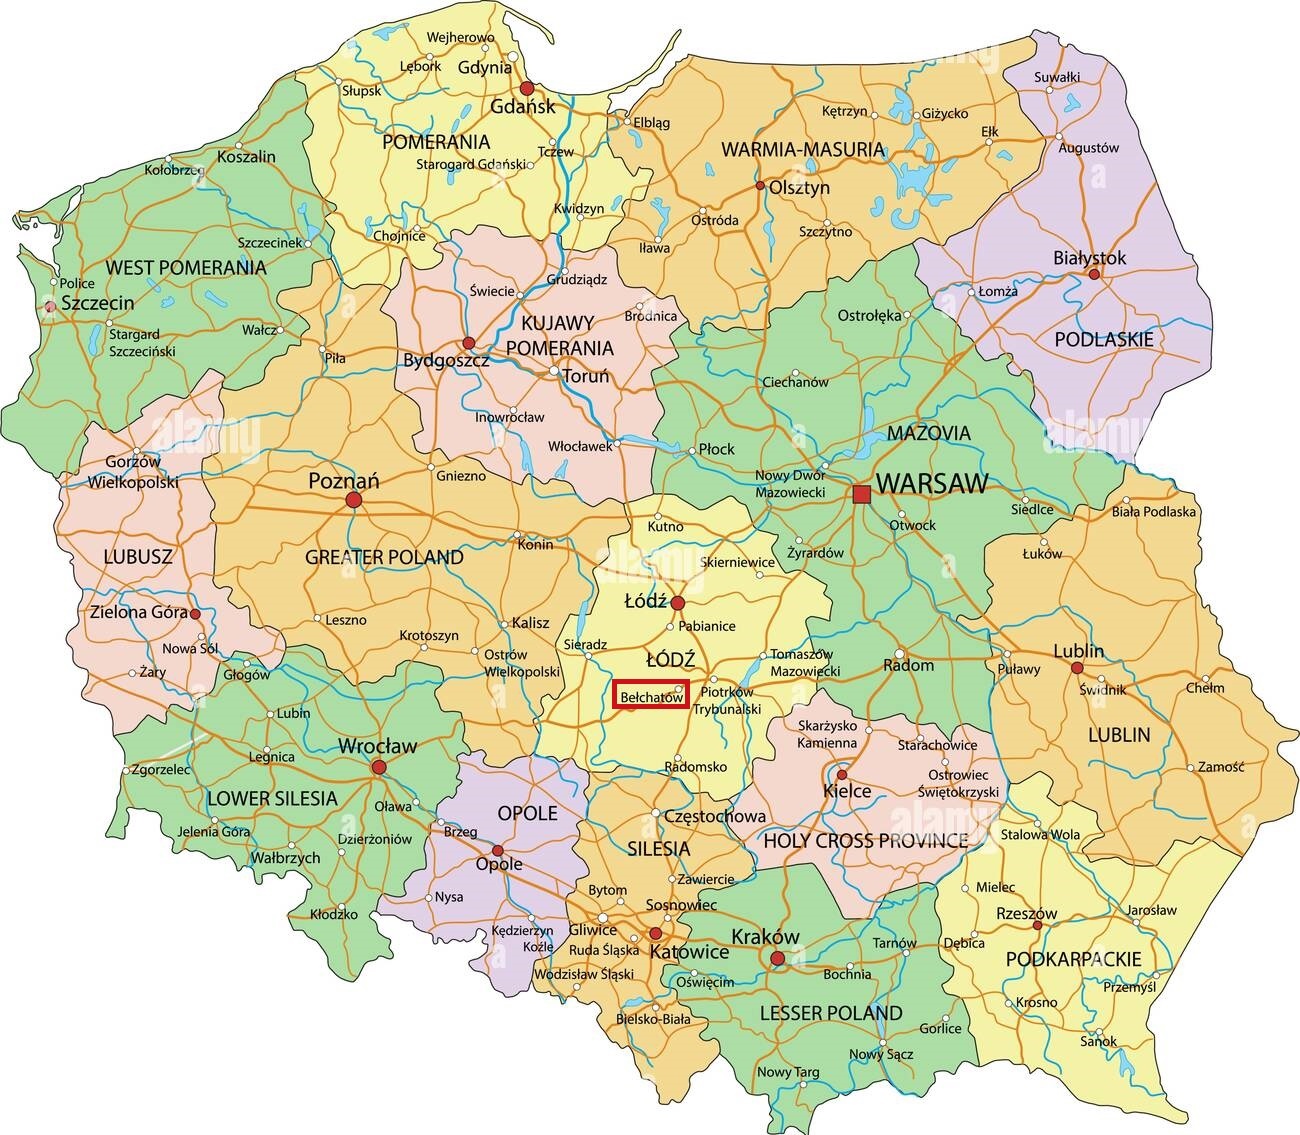 poland-highly-detailed-editable-political-map-with-labeling-2c09jky.jpg